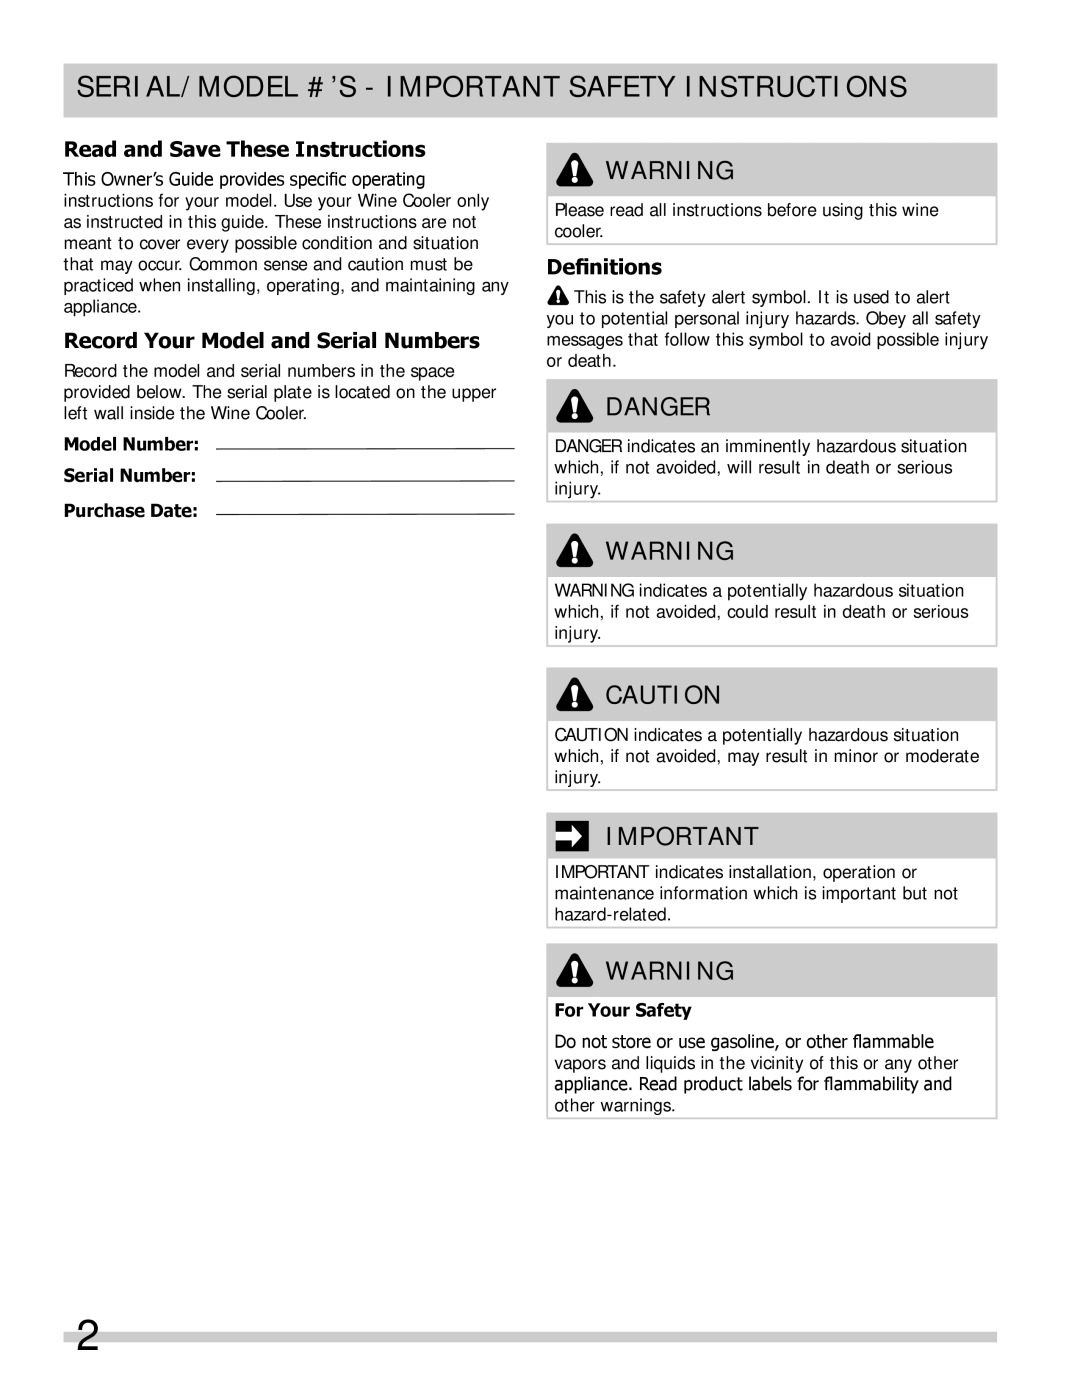 Frigidaire FFWC42F5LS SERIAL/MODEL #’S - Important Safety Instructions, Danger, Read and Save These Instructions 